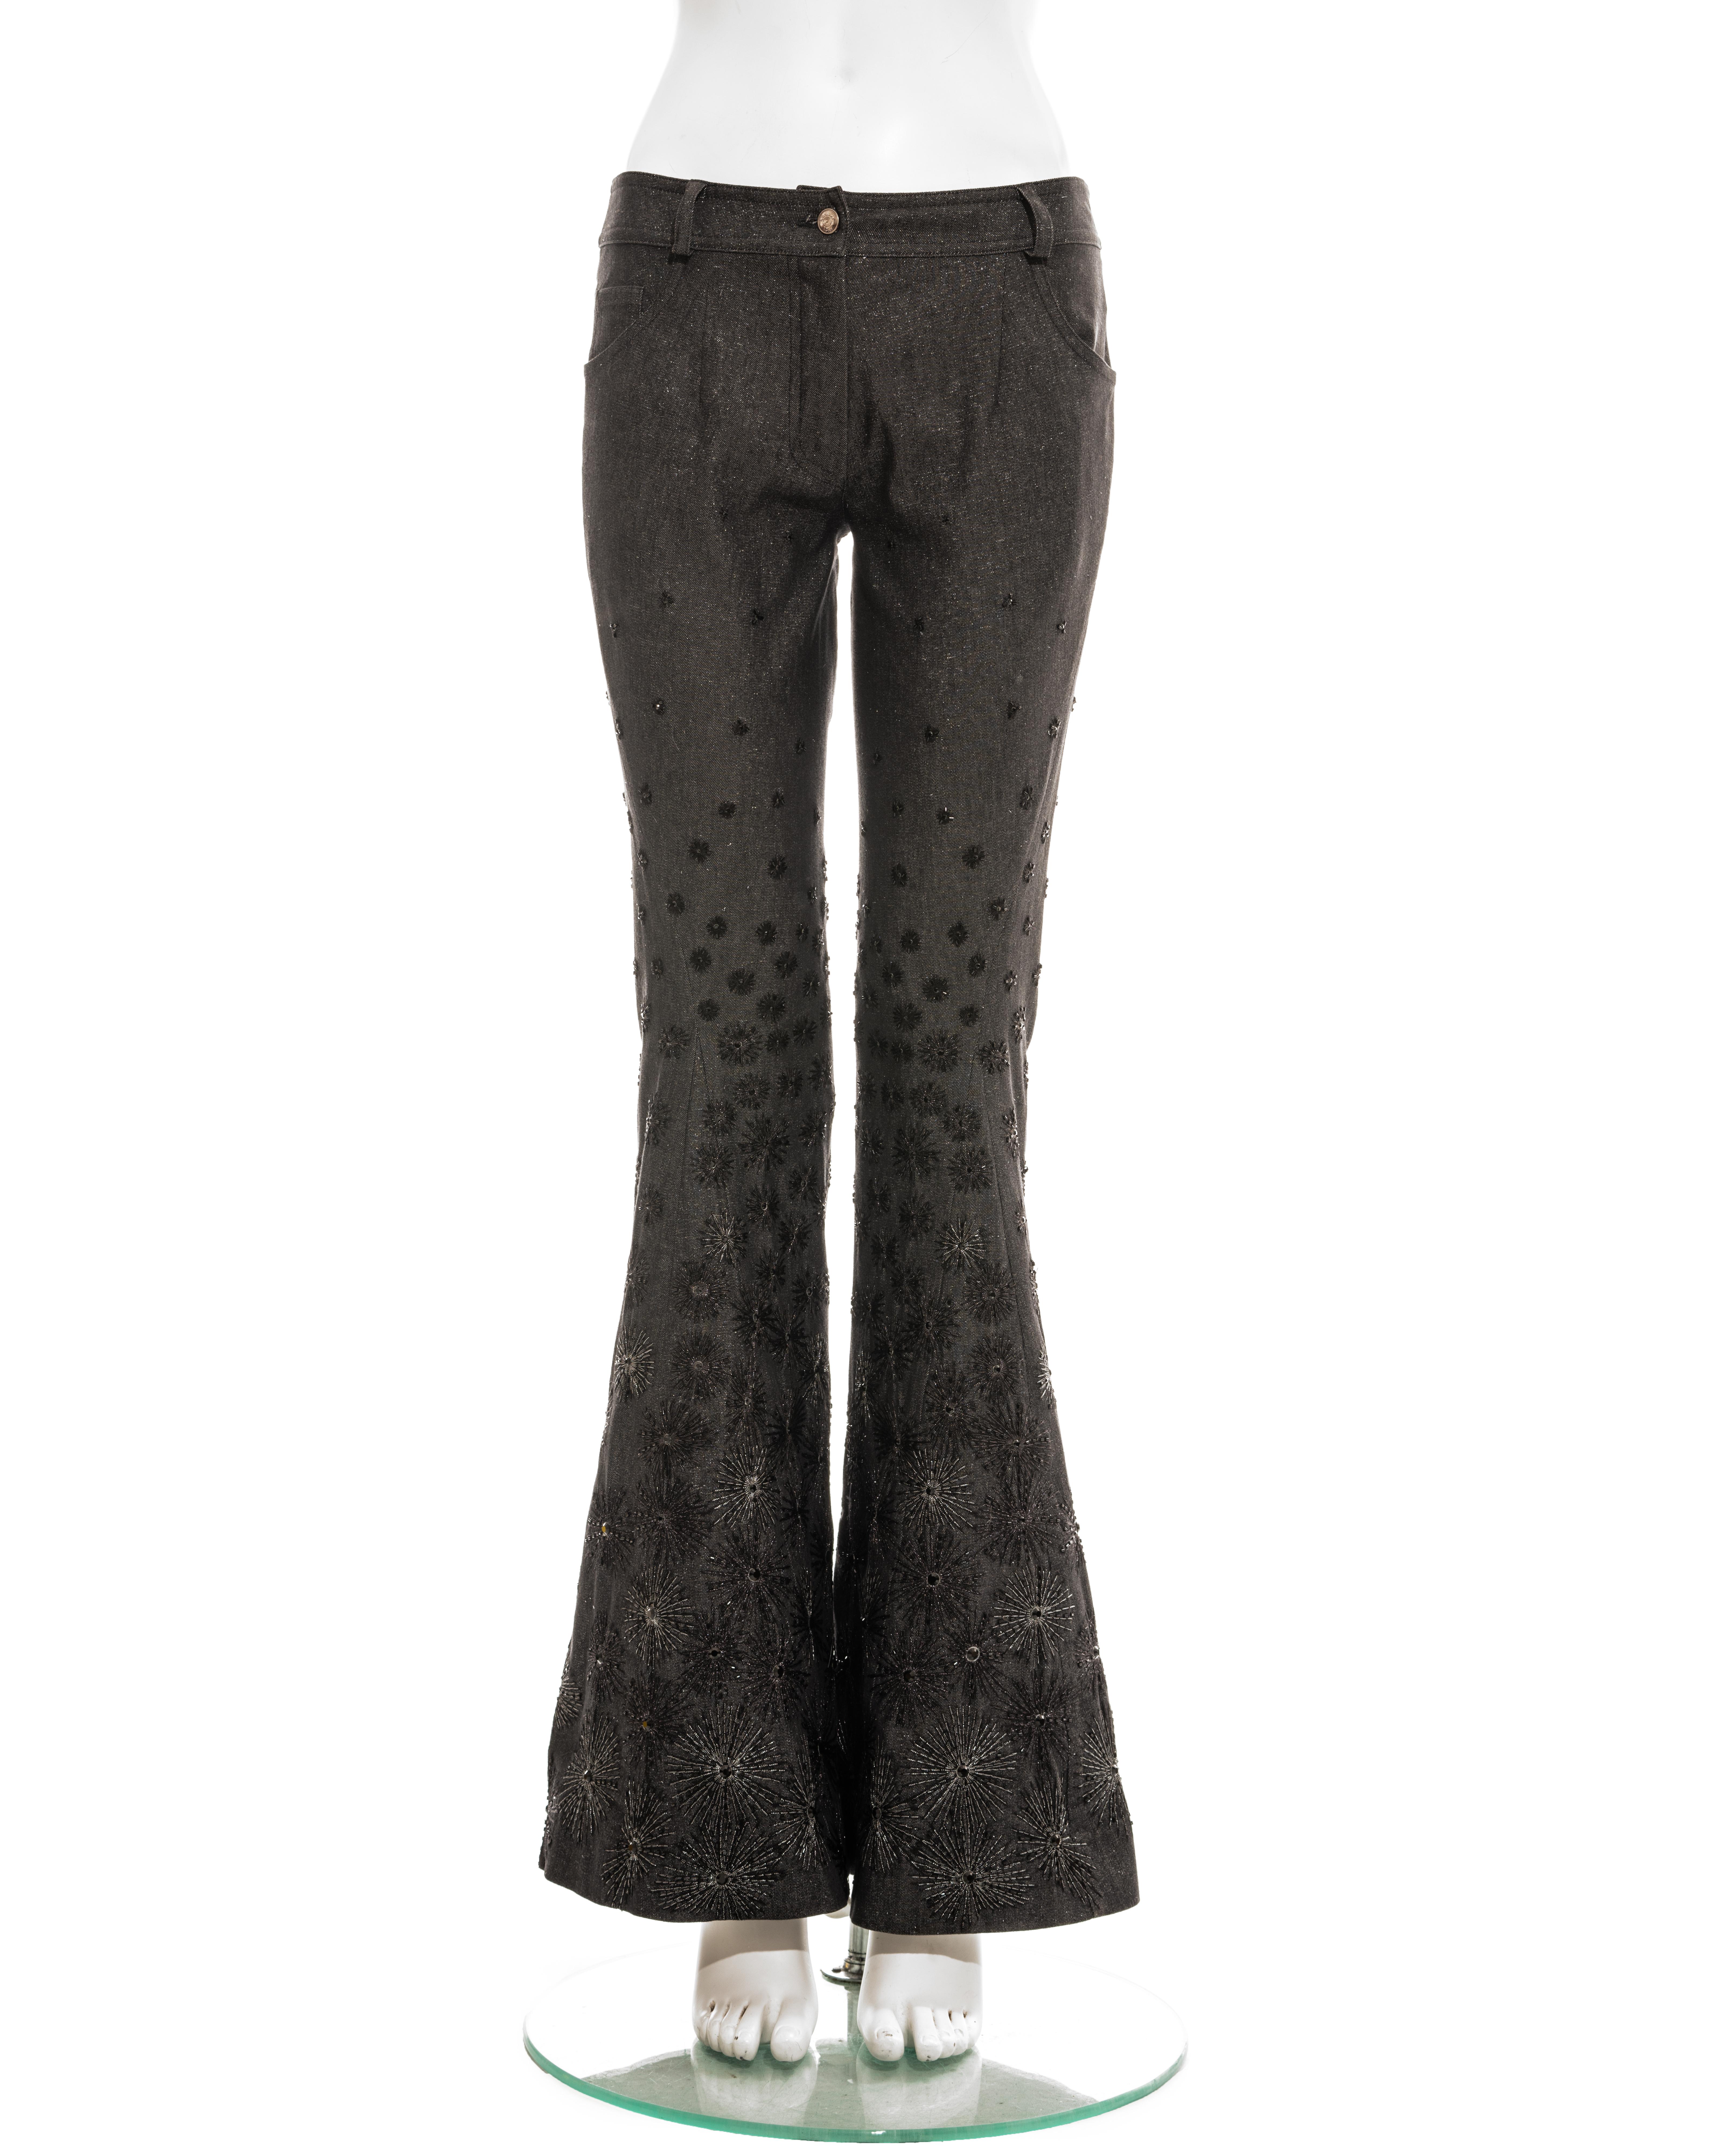 Christian Dior by John Galliano grey cotton denim flared pants with embroidery and beading. 

Spring-Summer 2002
